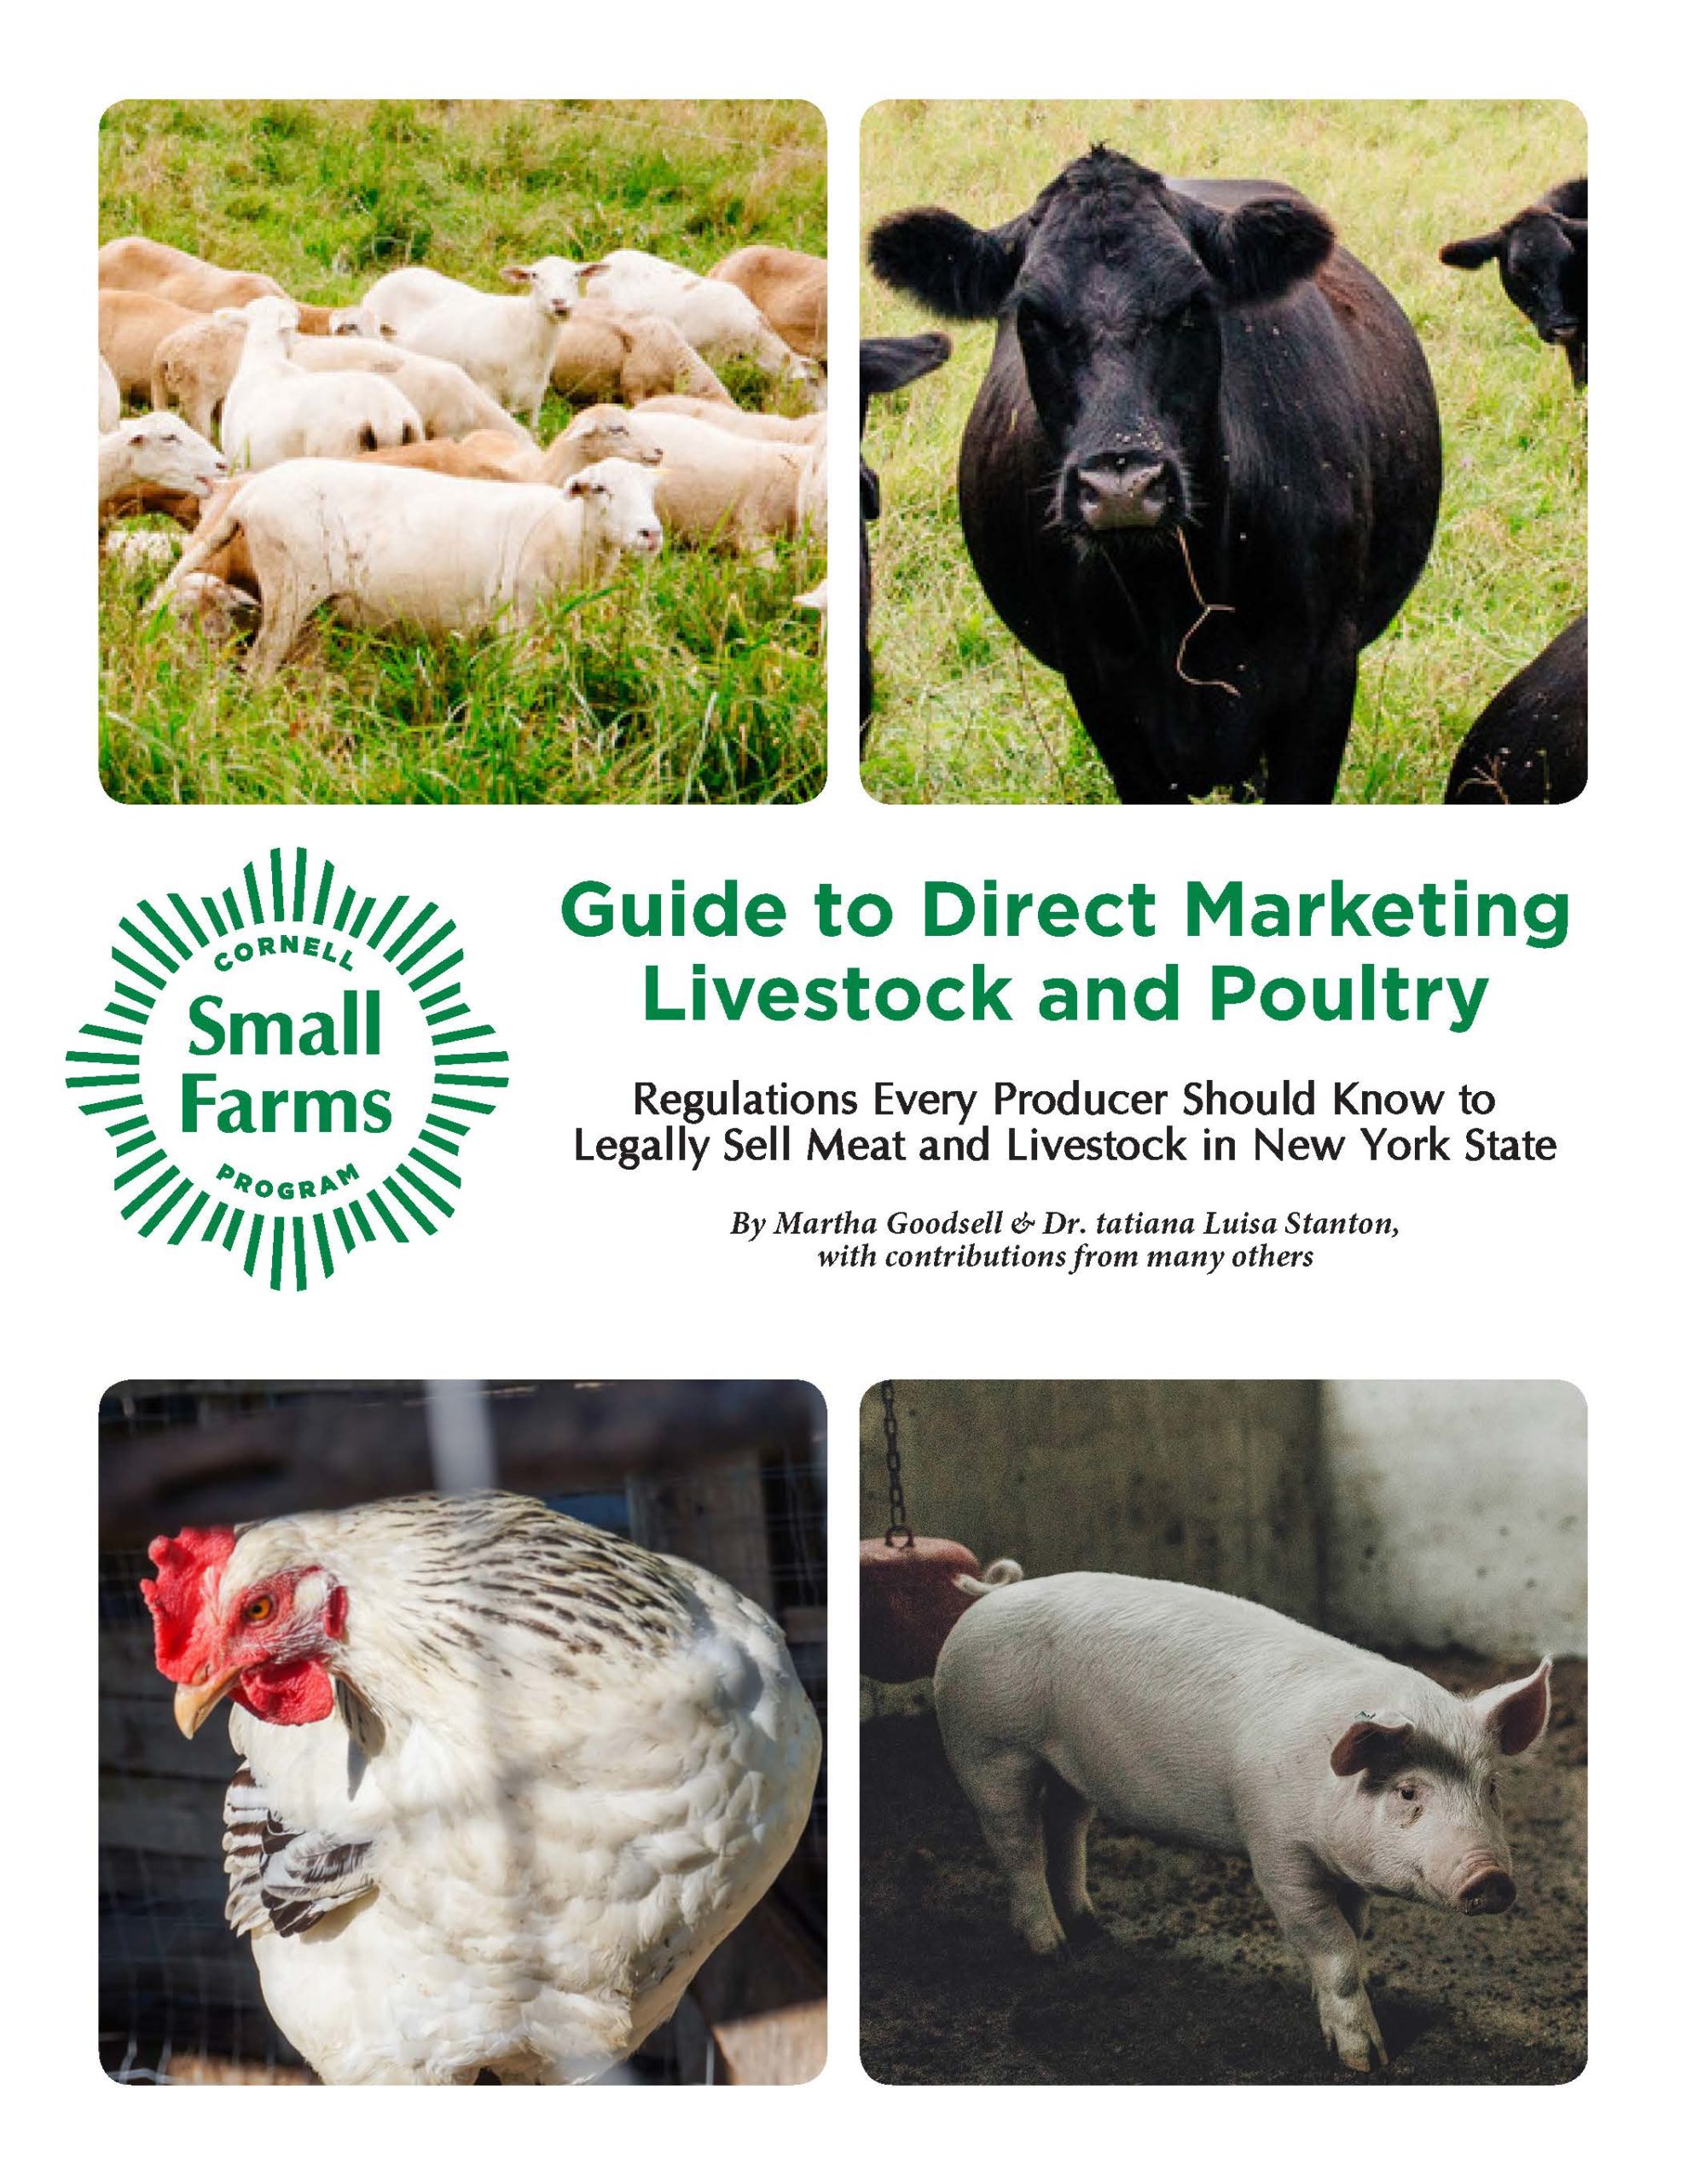 Marketing Livestock Guide 2020 updated cover scaled